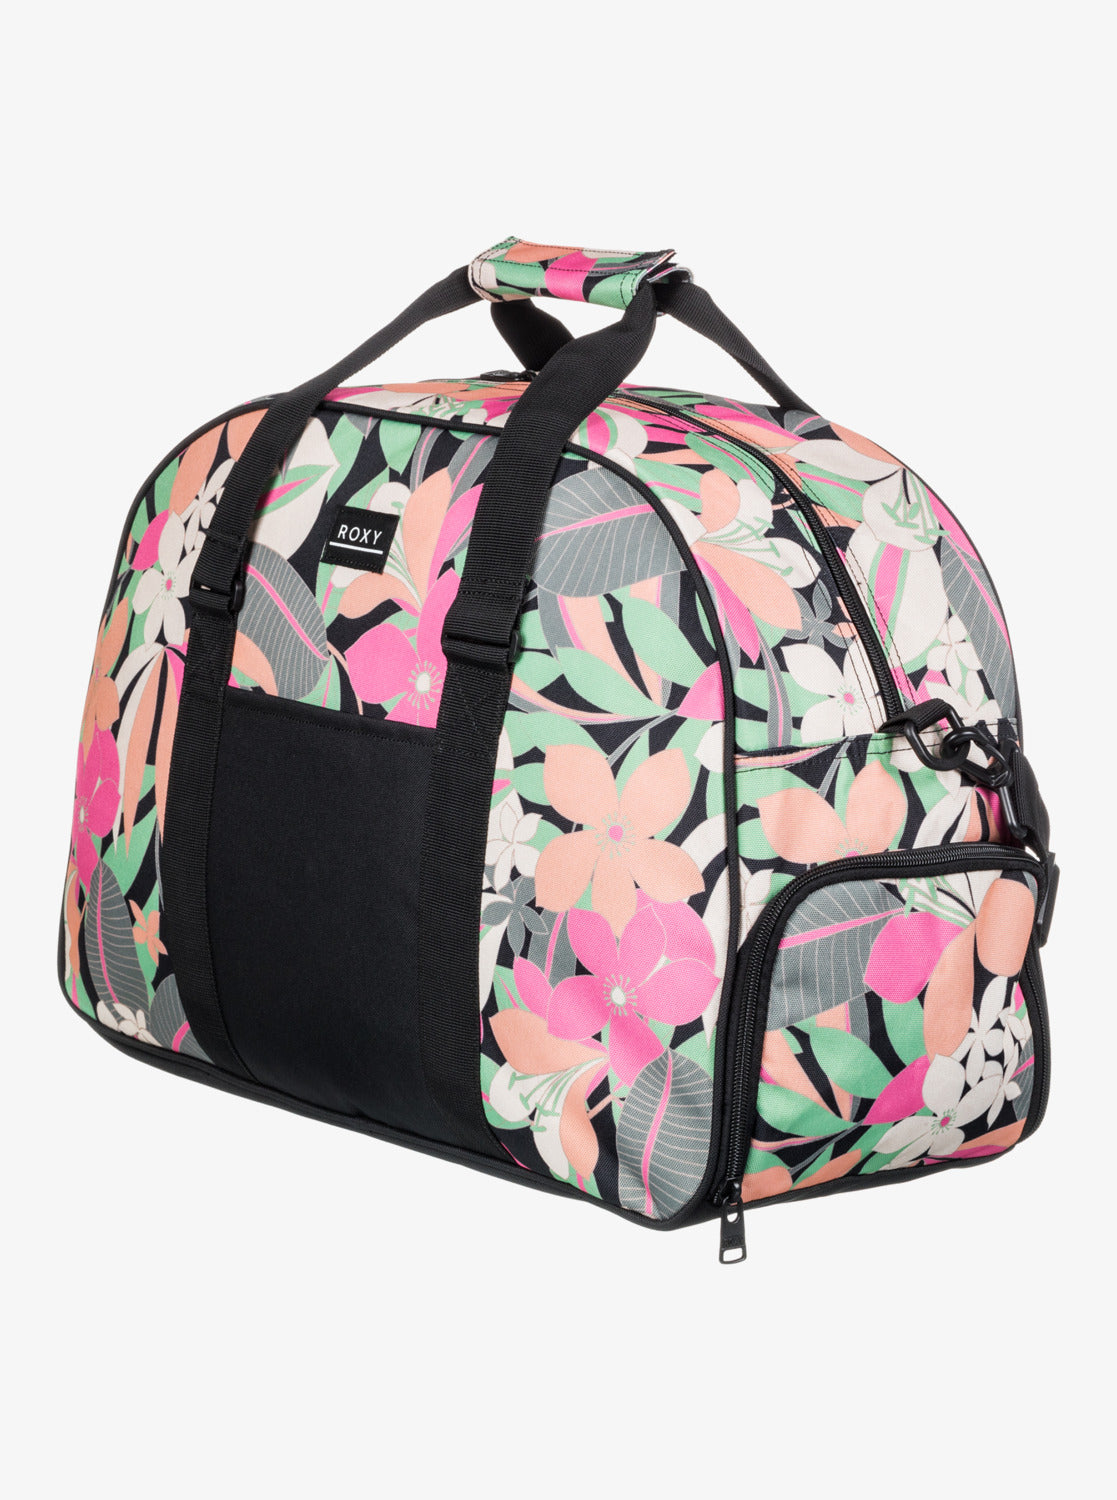 Roxy Feel Happy Medium Duffle Bag in Anthracite Palm Song